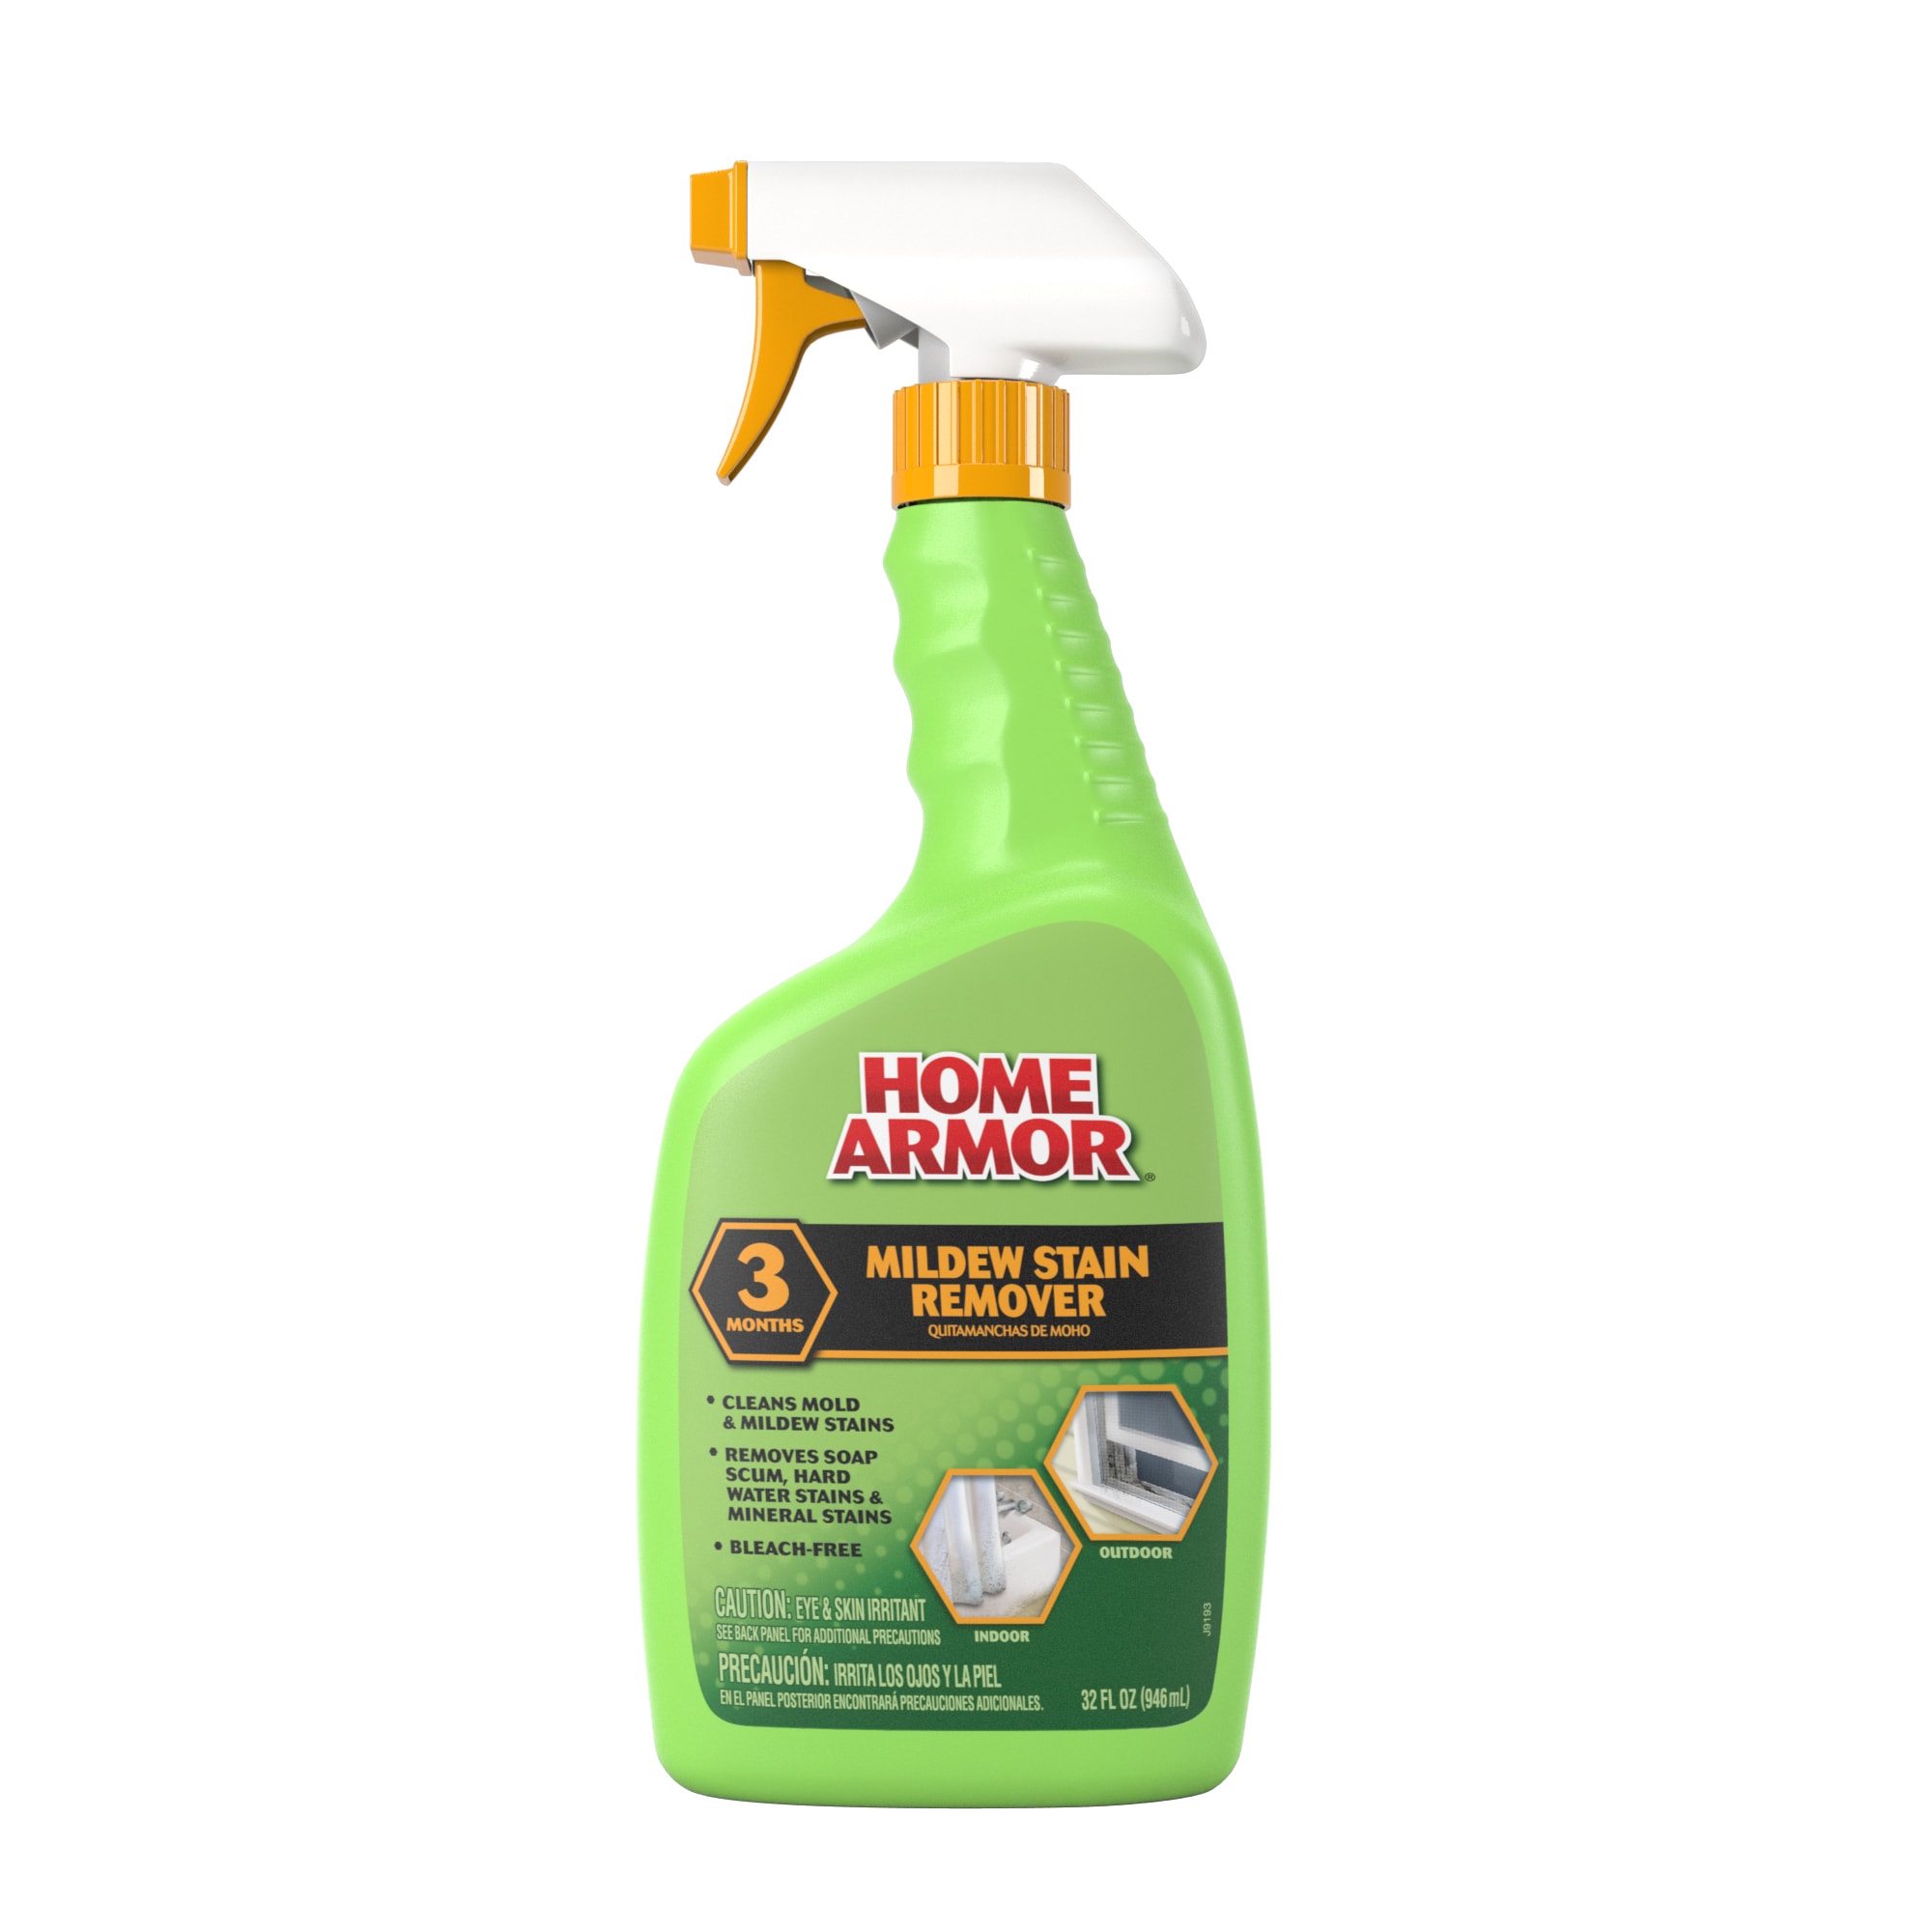 Mold Armor Deck Fence and Patio Wash 2.5 Gal - Removes Mold, Algae, Mildew,  Dirt - For Wood & Concrete - Cleans & Brightens in Minutes